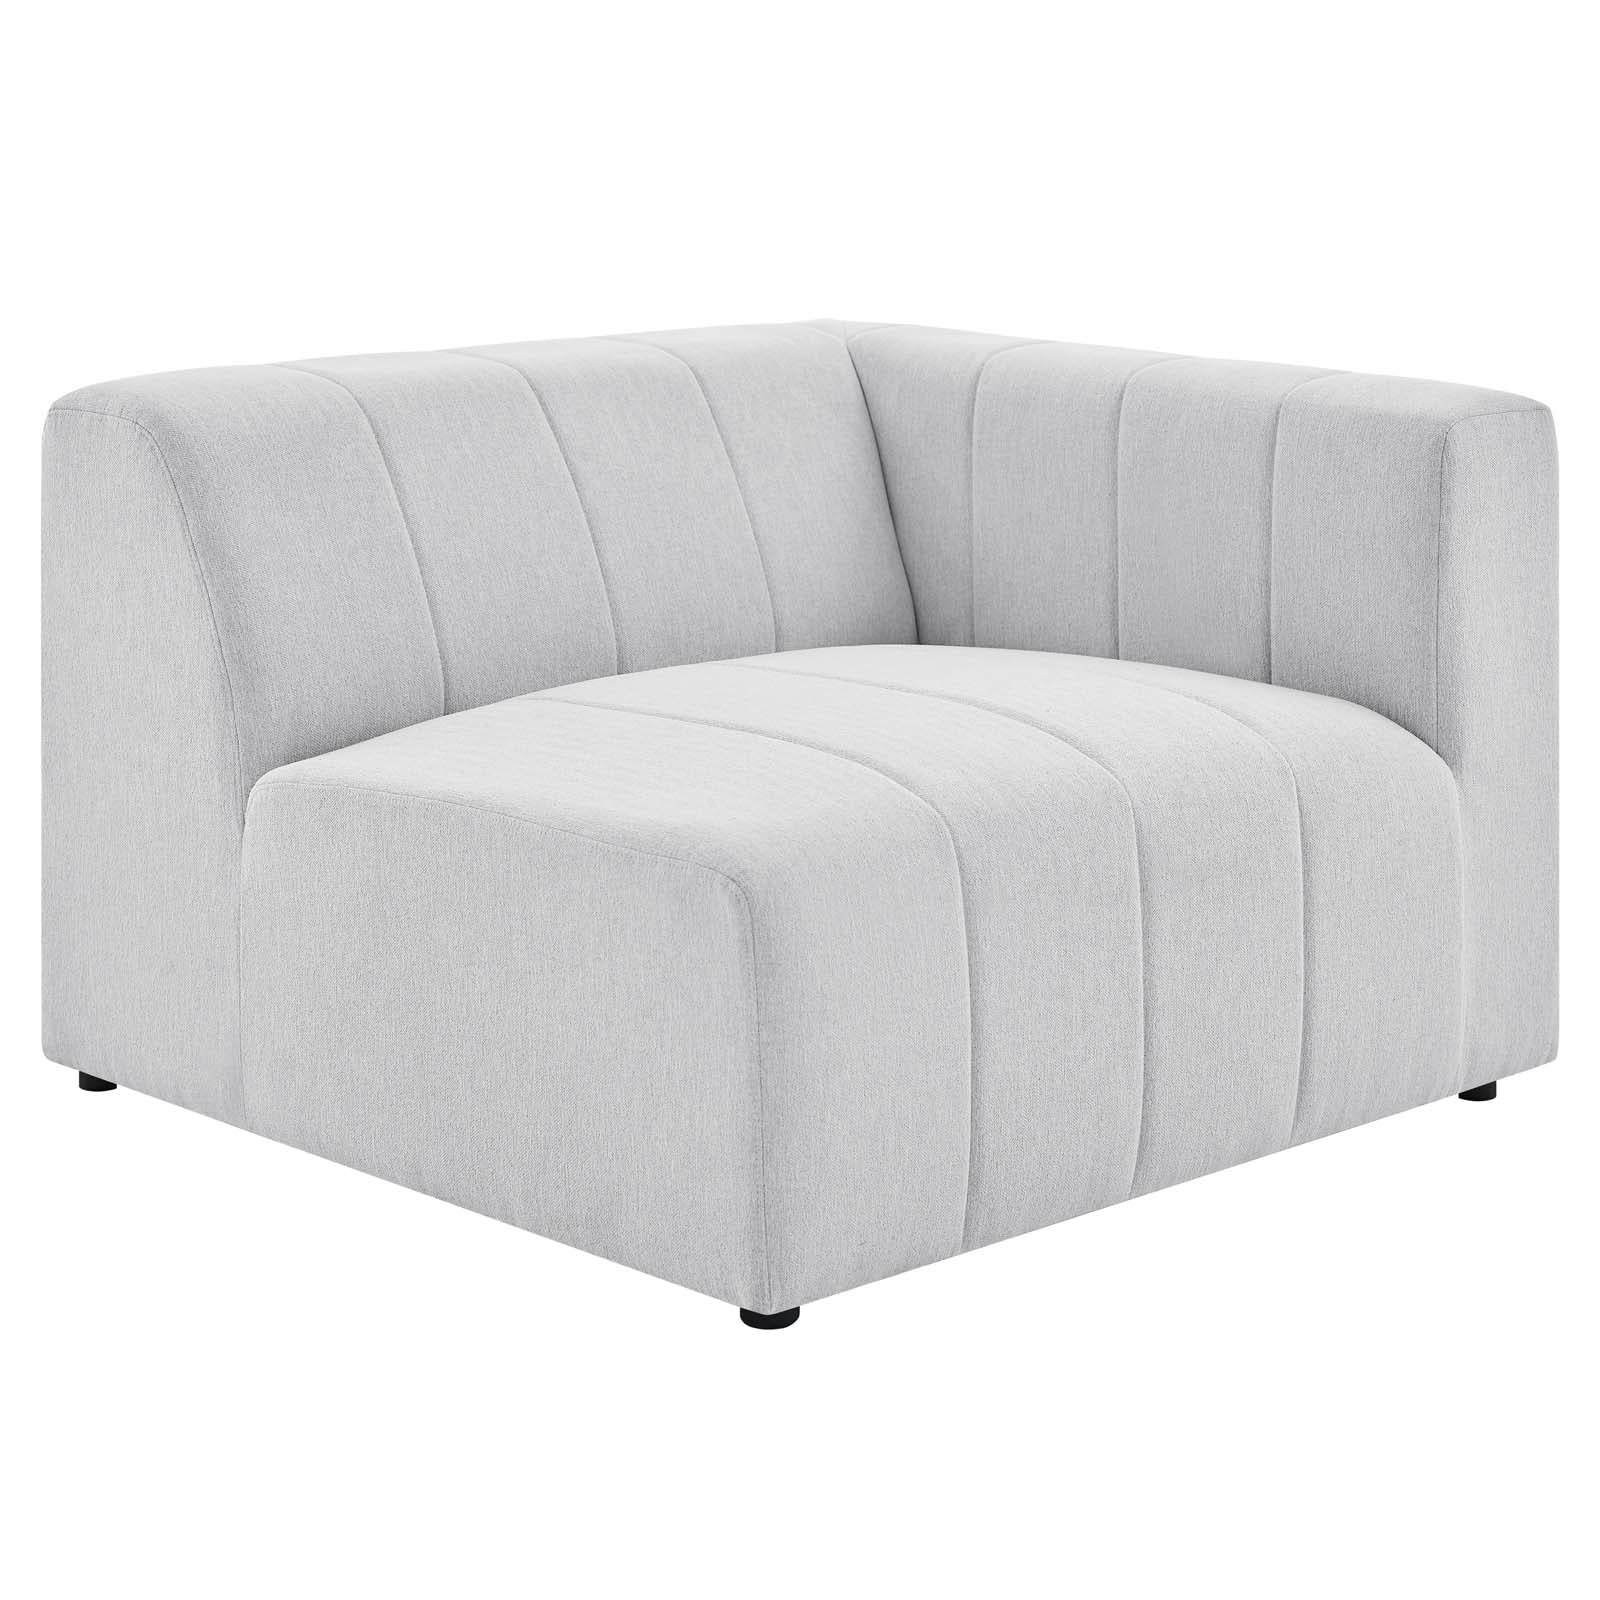 Modway Sectional Sofas - Bartlett Upholstered Fabric 27.5 " H 5-Piece Sectional Sofa Ivory